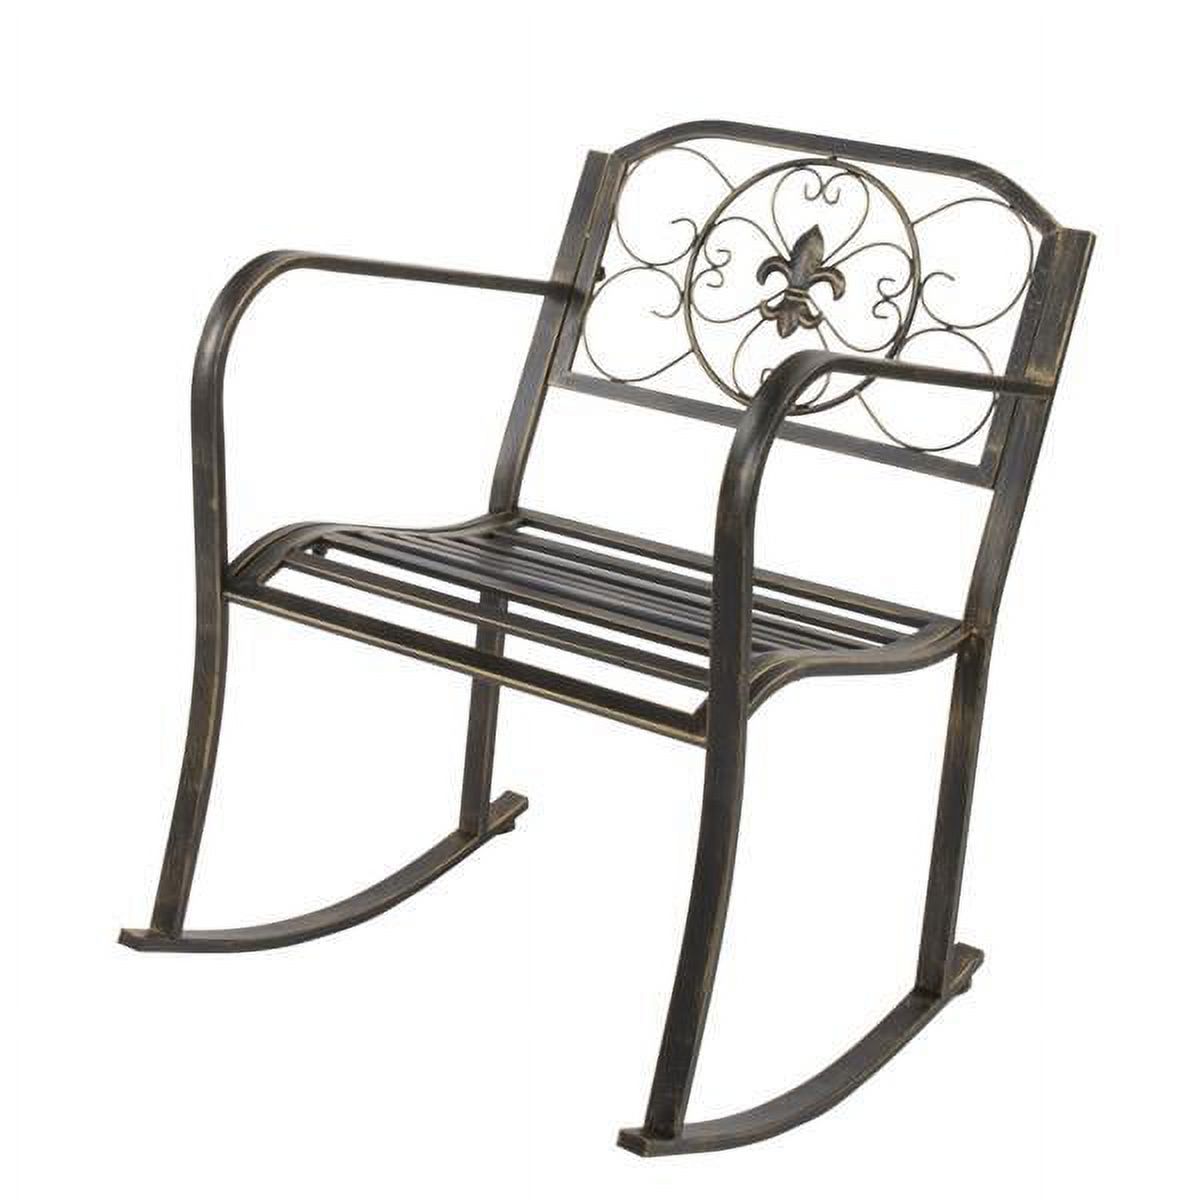 Flat Tube Iron Wire Single Rocking Chair Bronze Color, Stable & Sturdy Garden Iron Art Rocking Chair Family Chairs for Patio, Deck, Backyard or Garden Outdoor Use - image 1 of 1